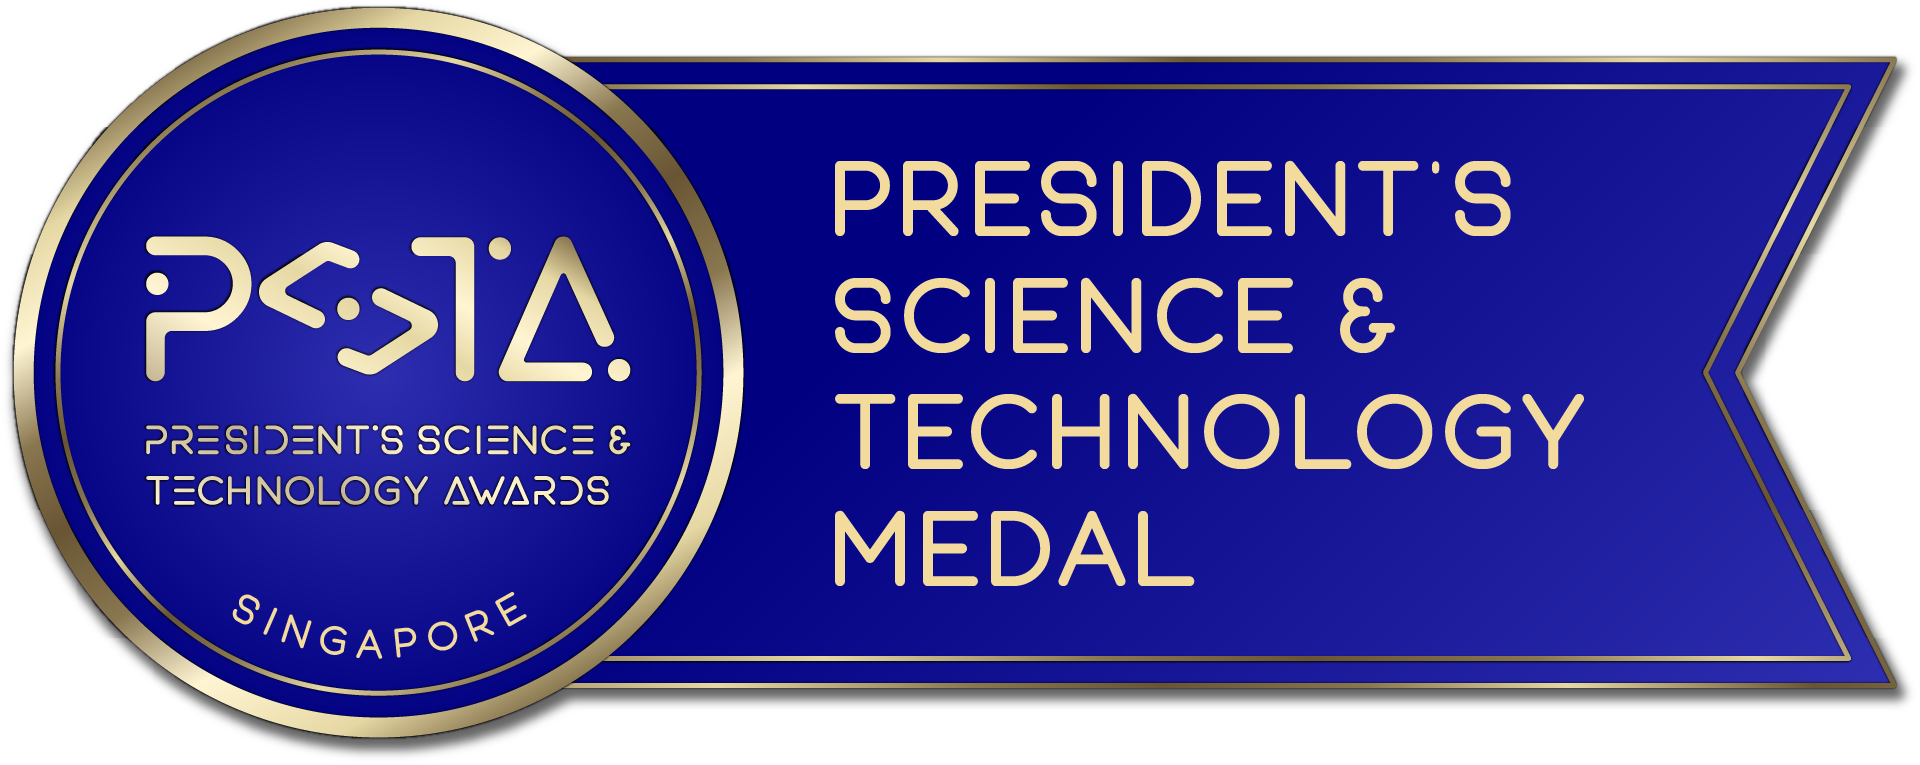 President’s Science And Technology Medal (PSTM)